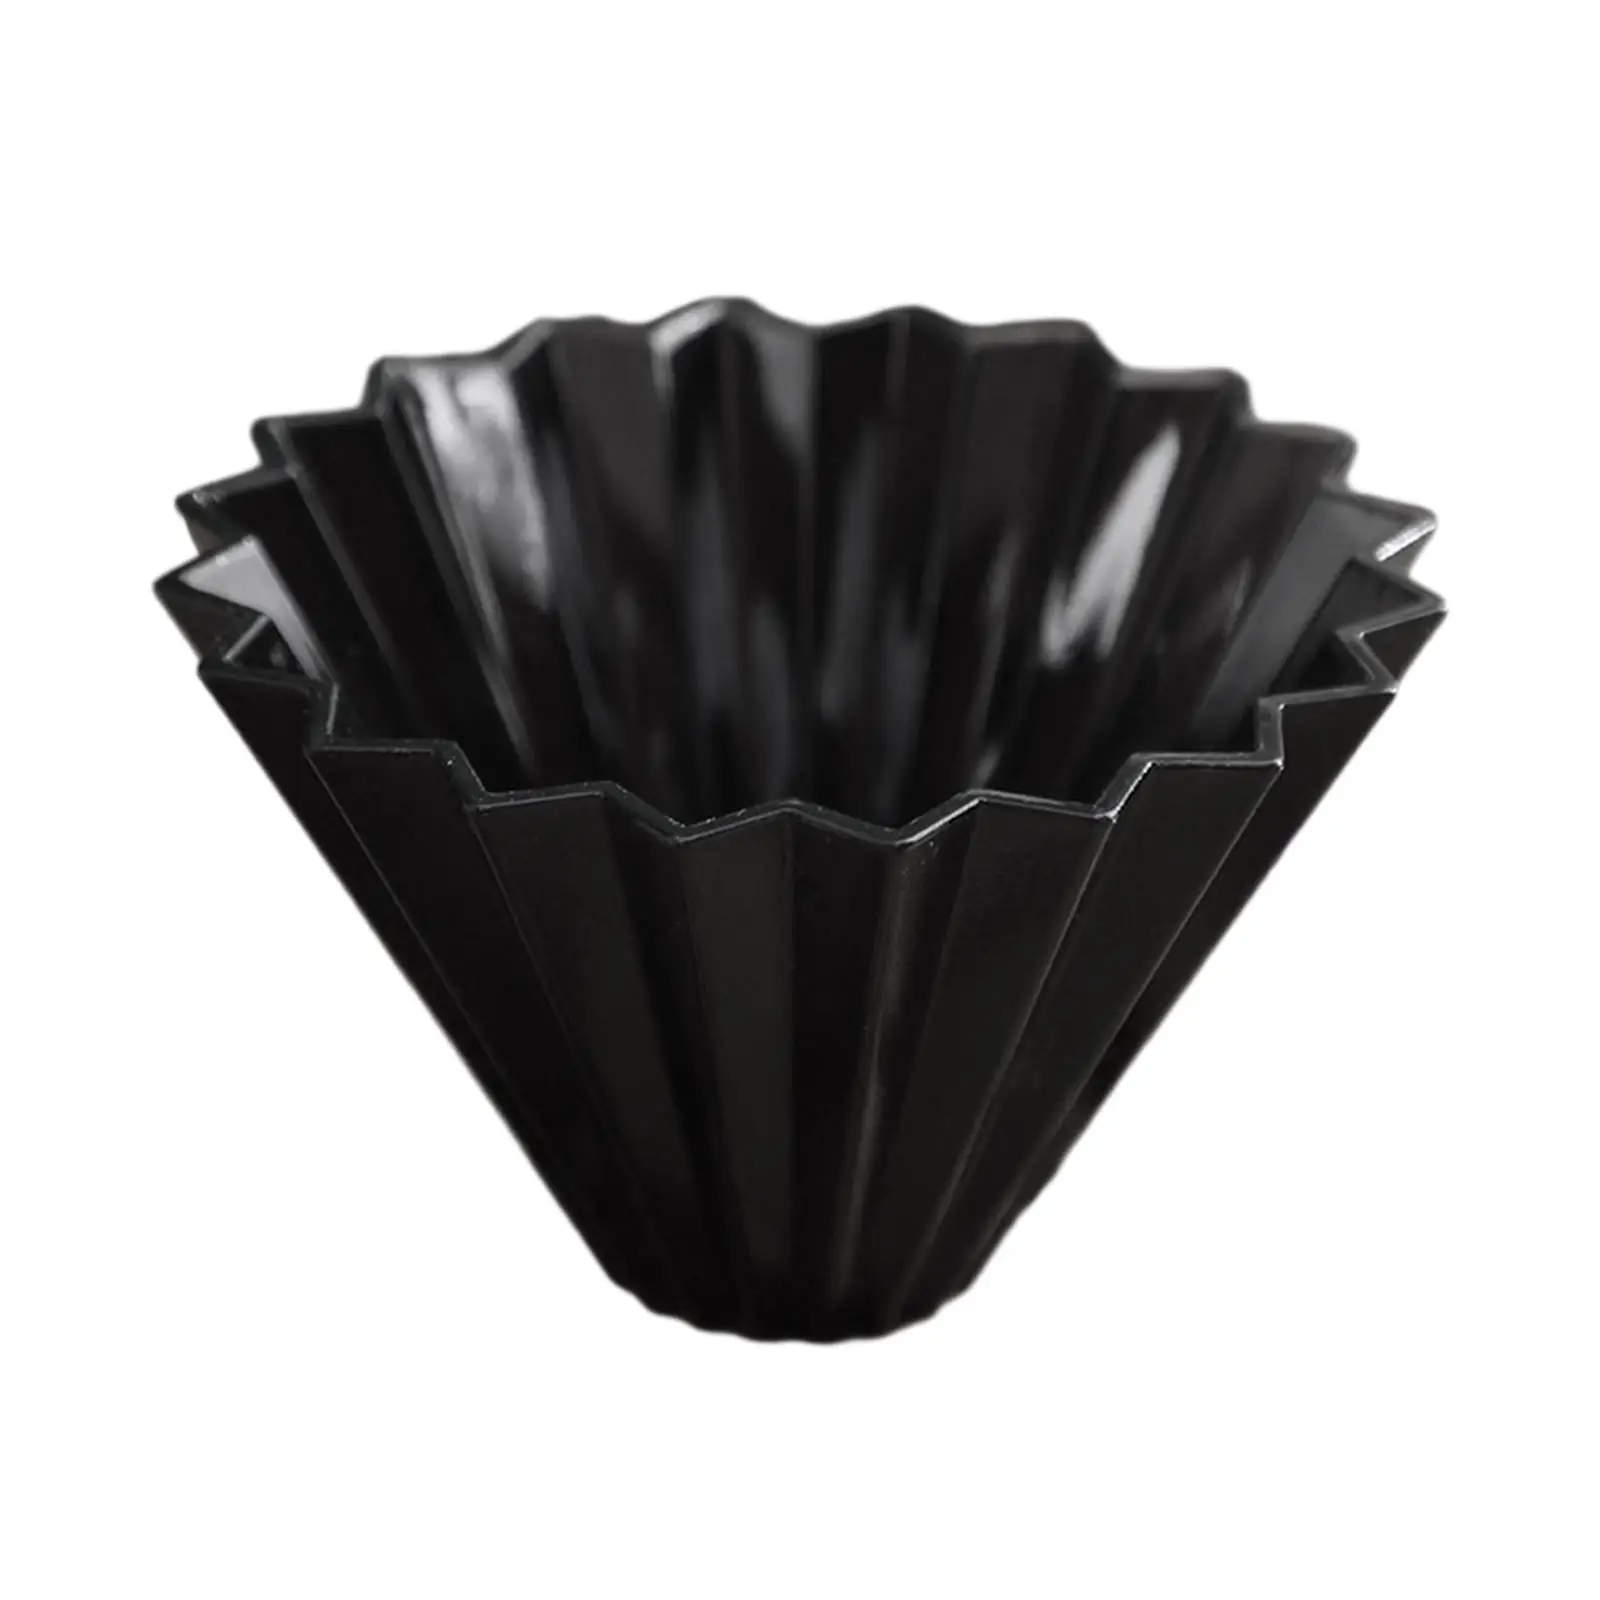 Pour over Coffee Filter Coffee Dripper Reusable for Single Cup Brew Coffee Filter Cone Coffee Filter Holder for Office